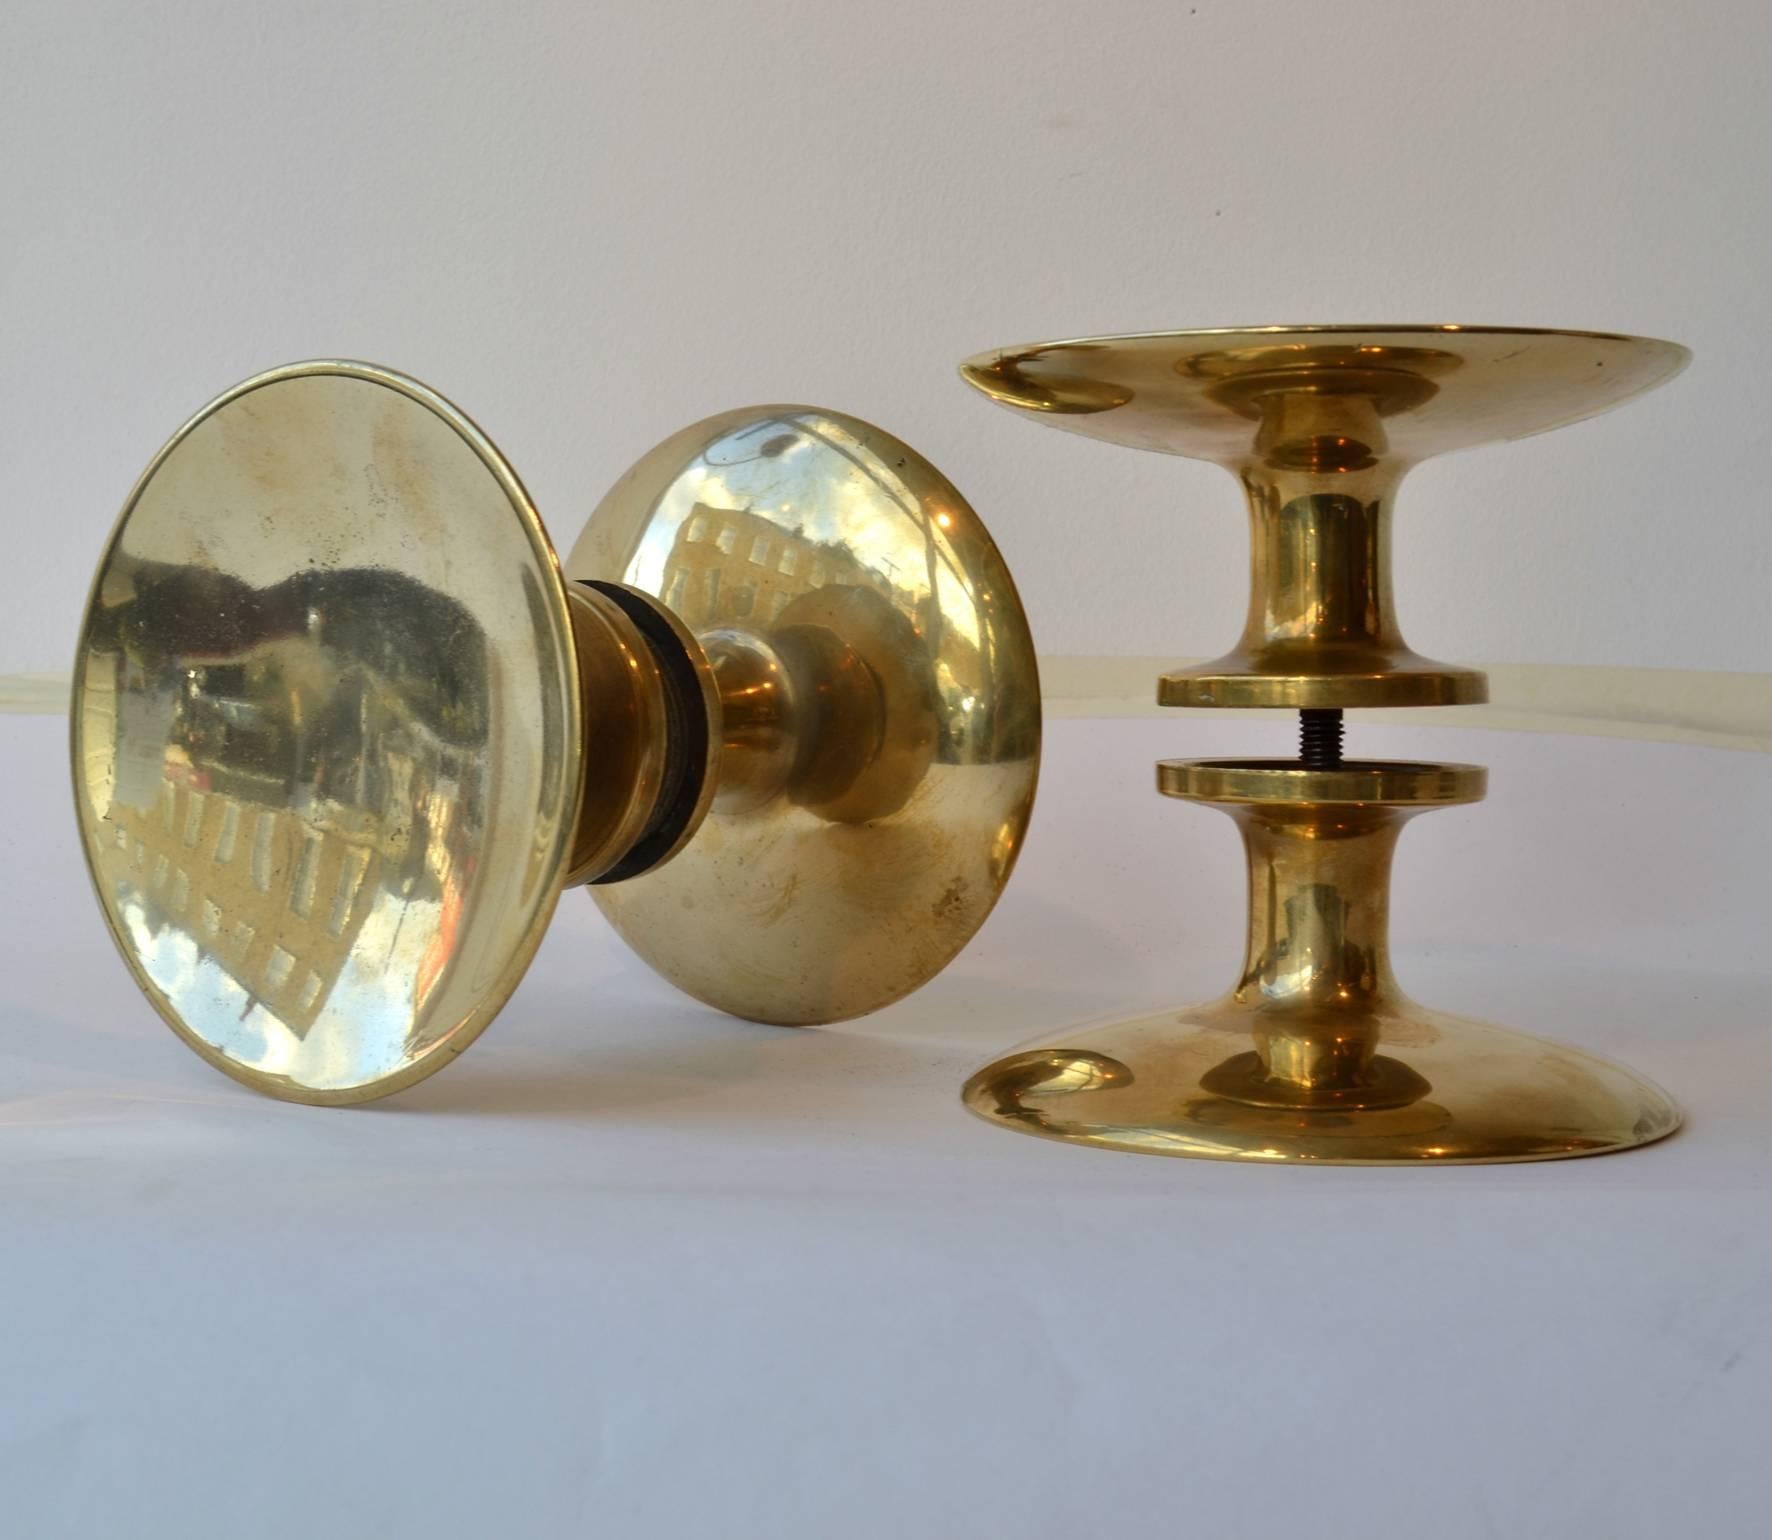 Polished gold color bronze door handles for push and pull doors in a pair.